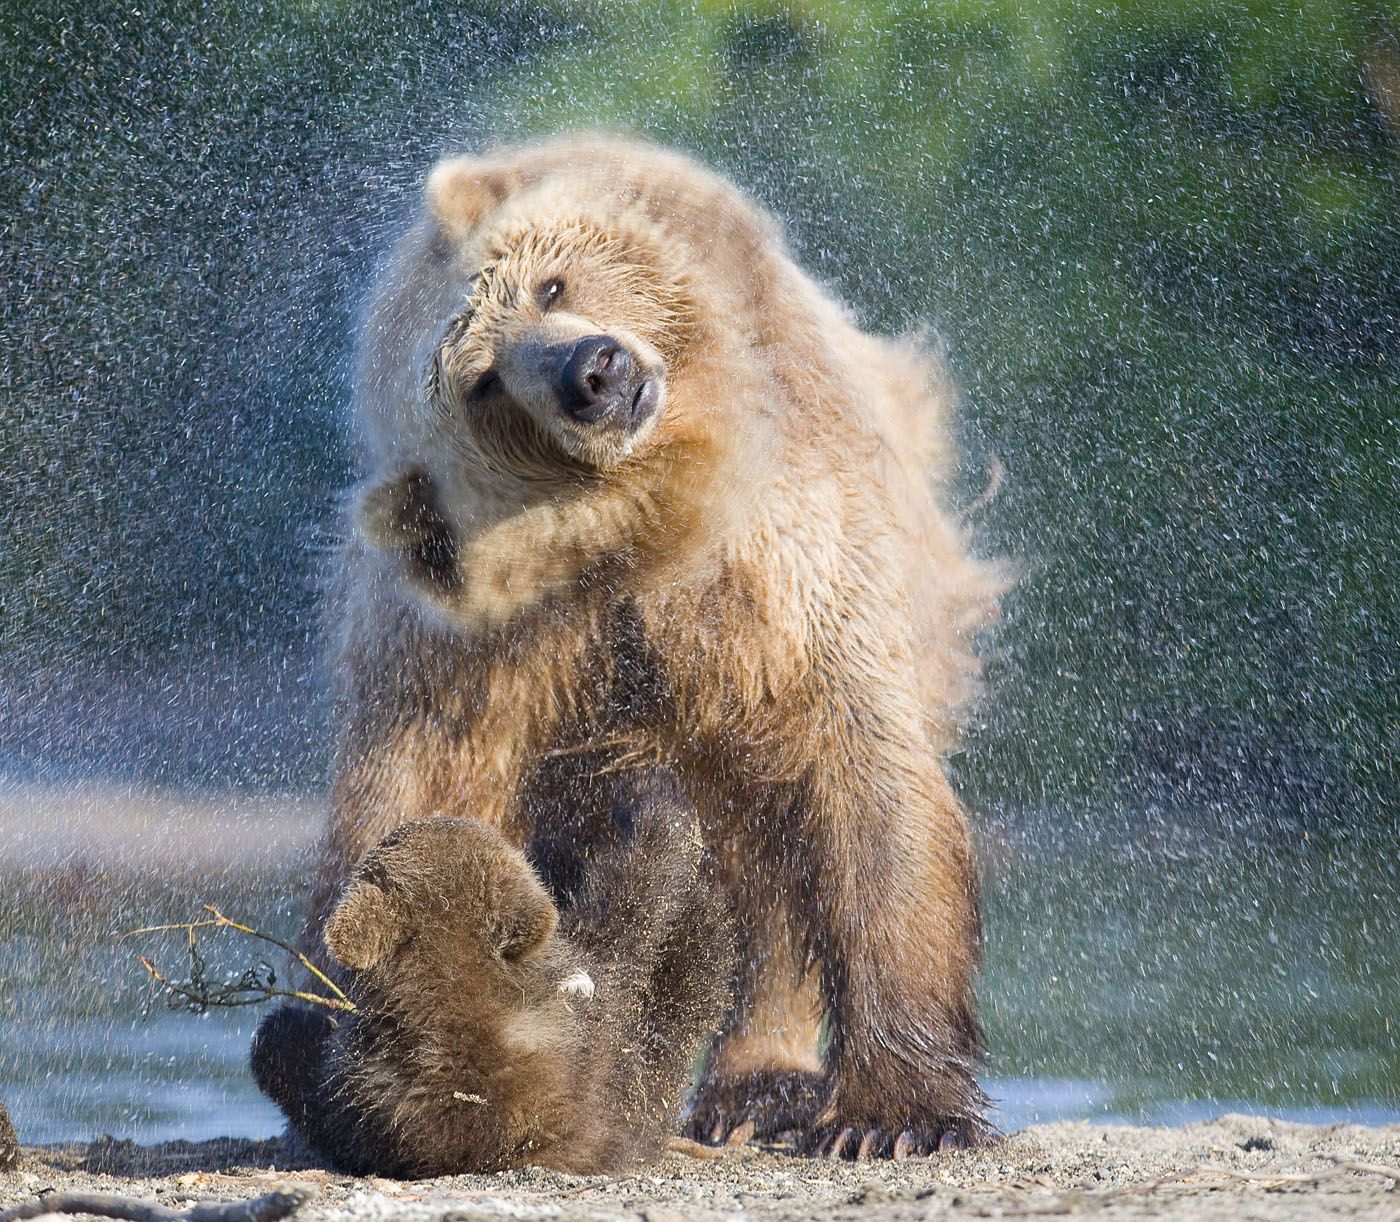 Shower from Mom